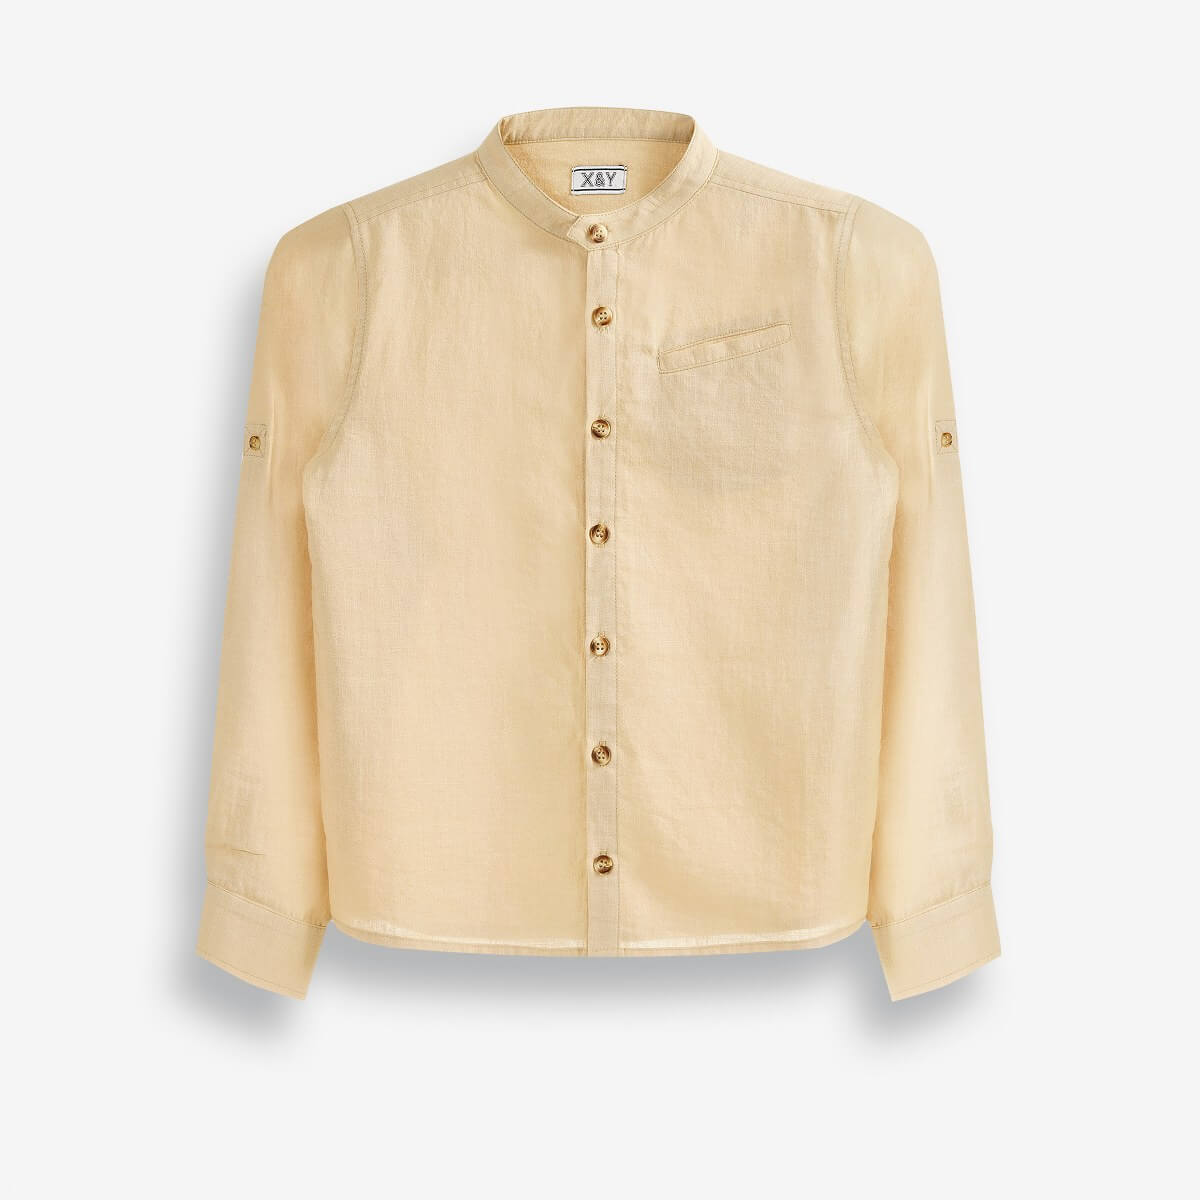 Boys' Button-Up Shirt with Long Cuffed Sleeves